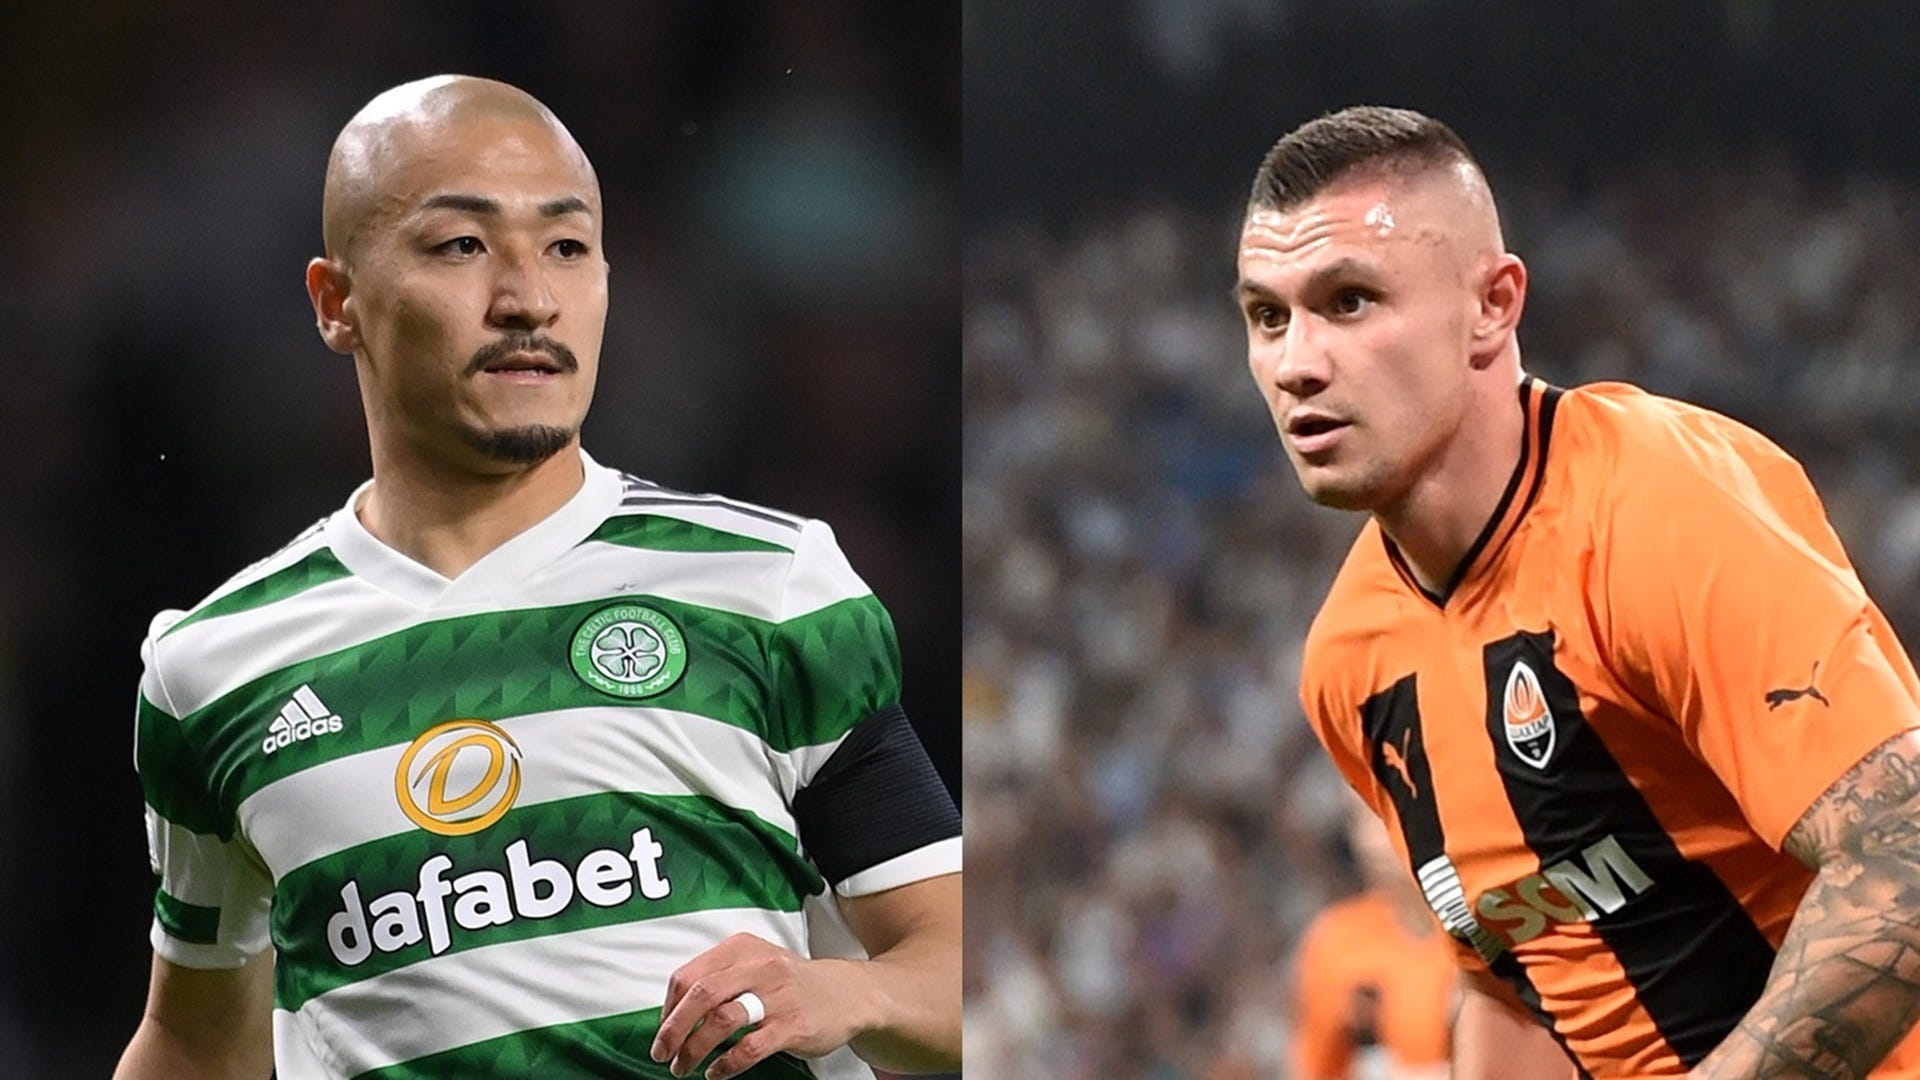 Celtic vs Shakhtar Donetsk Live stream, TV channel, kick-off time and how to watch Goal India